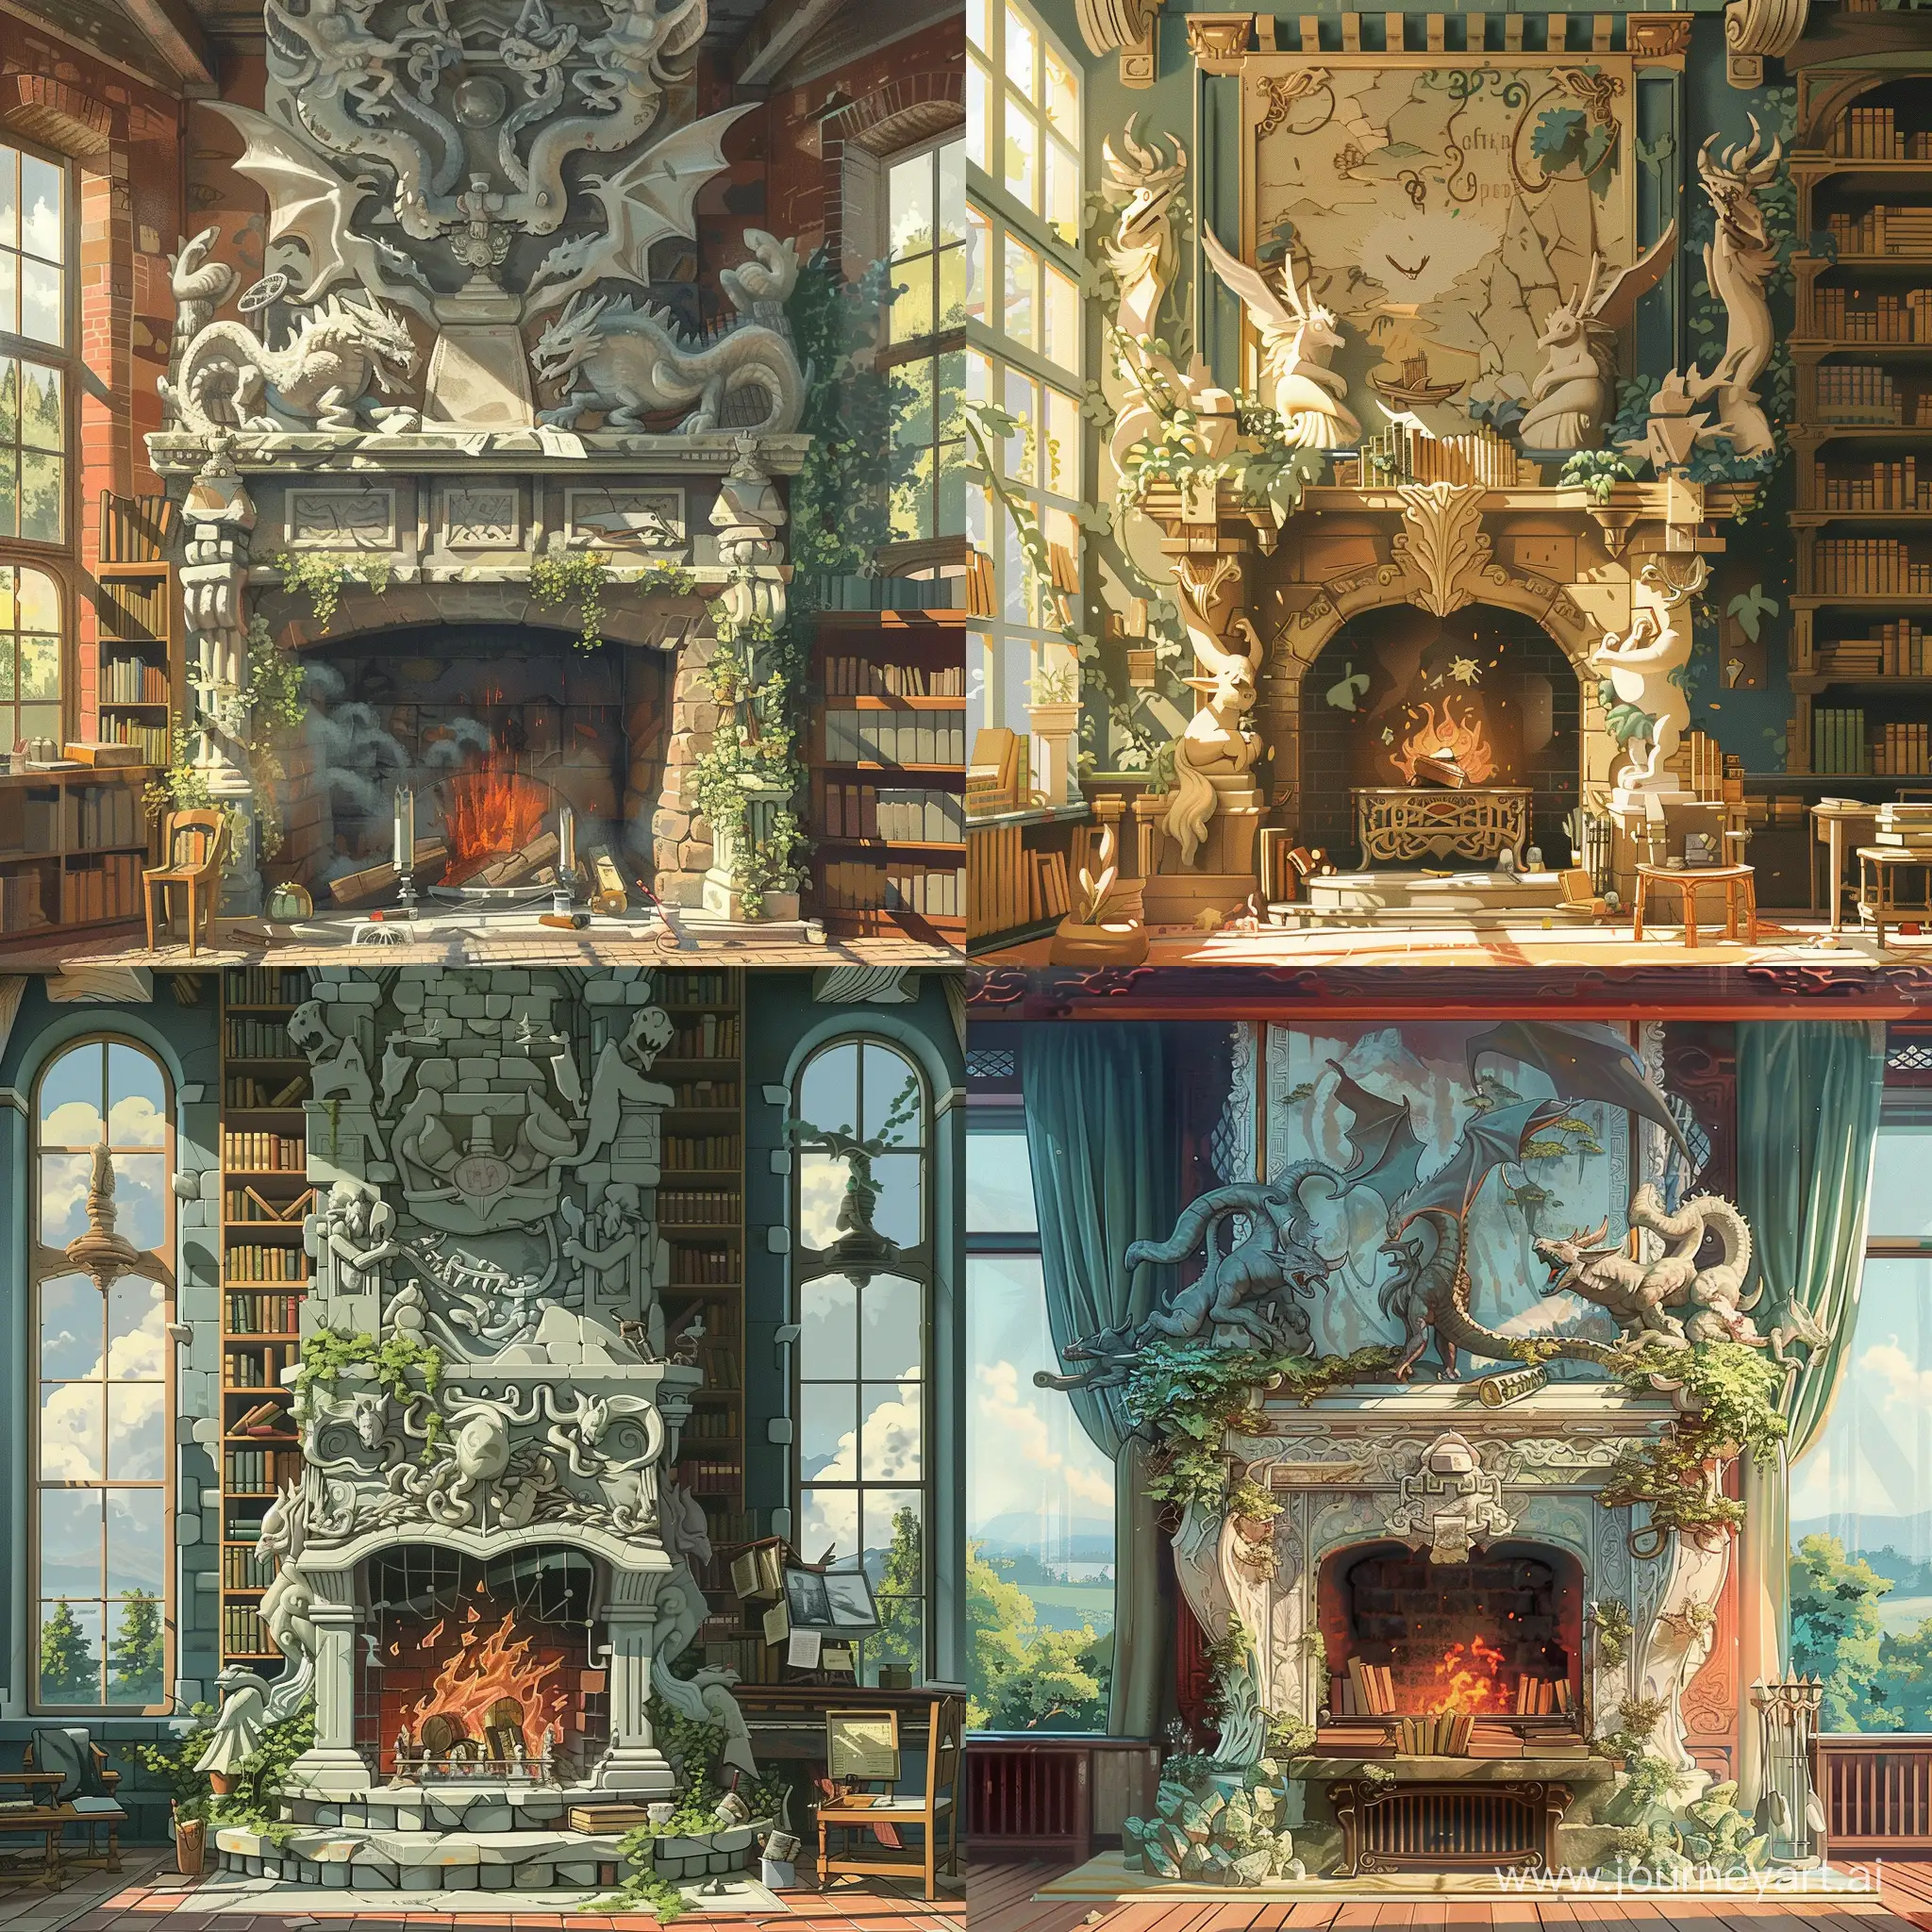 Fantasy-Wizards-Study-Room-with-Orcs-and-Dragons-Fireplace